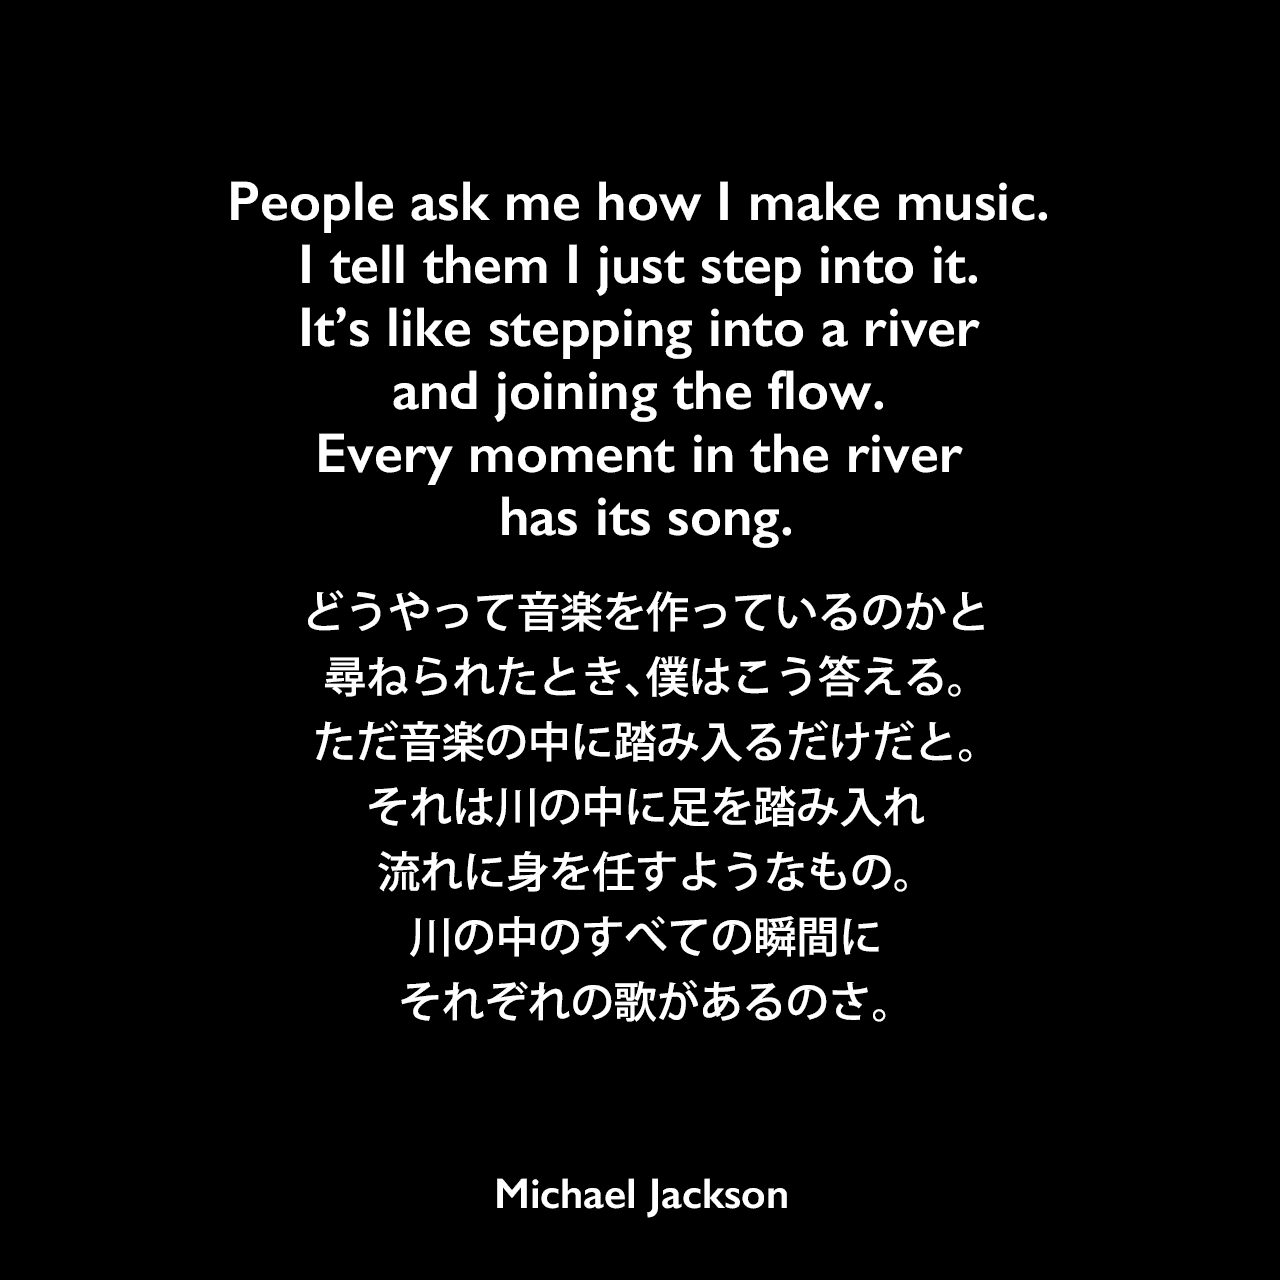 People ask me how I make music. I tell them I just step into it. It’s like stepping into a river and joining the flow. Every moment in the river has its song.どうやって音楽を作っているのかと尋ねられたとき、僕はこう答える。ただ音楽の中に踏み入るだけだと。それは川の中に足を踏み入れ、流れに身を任すようなもの。川の中のすべての瞬間に、それぞれの歌があるのさ。Michael Jackson